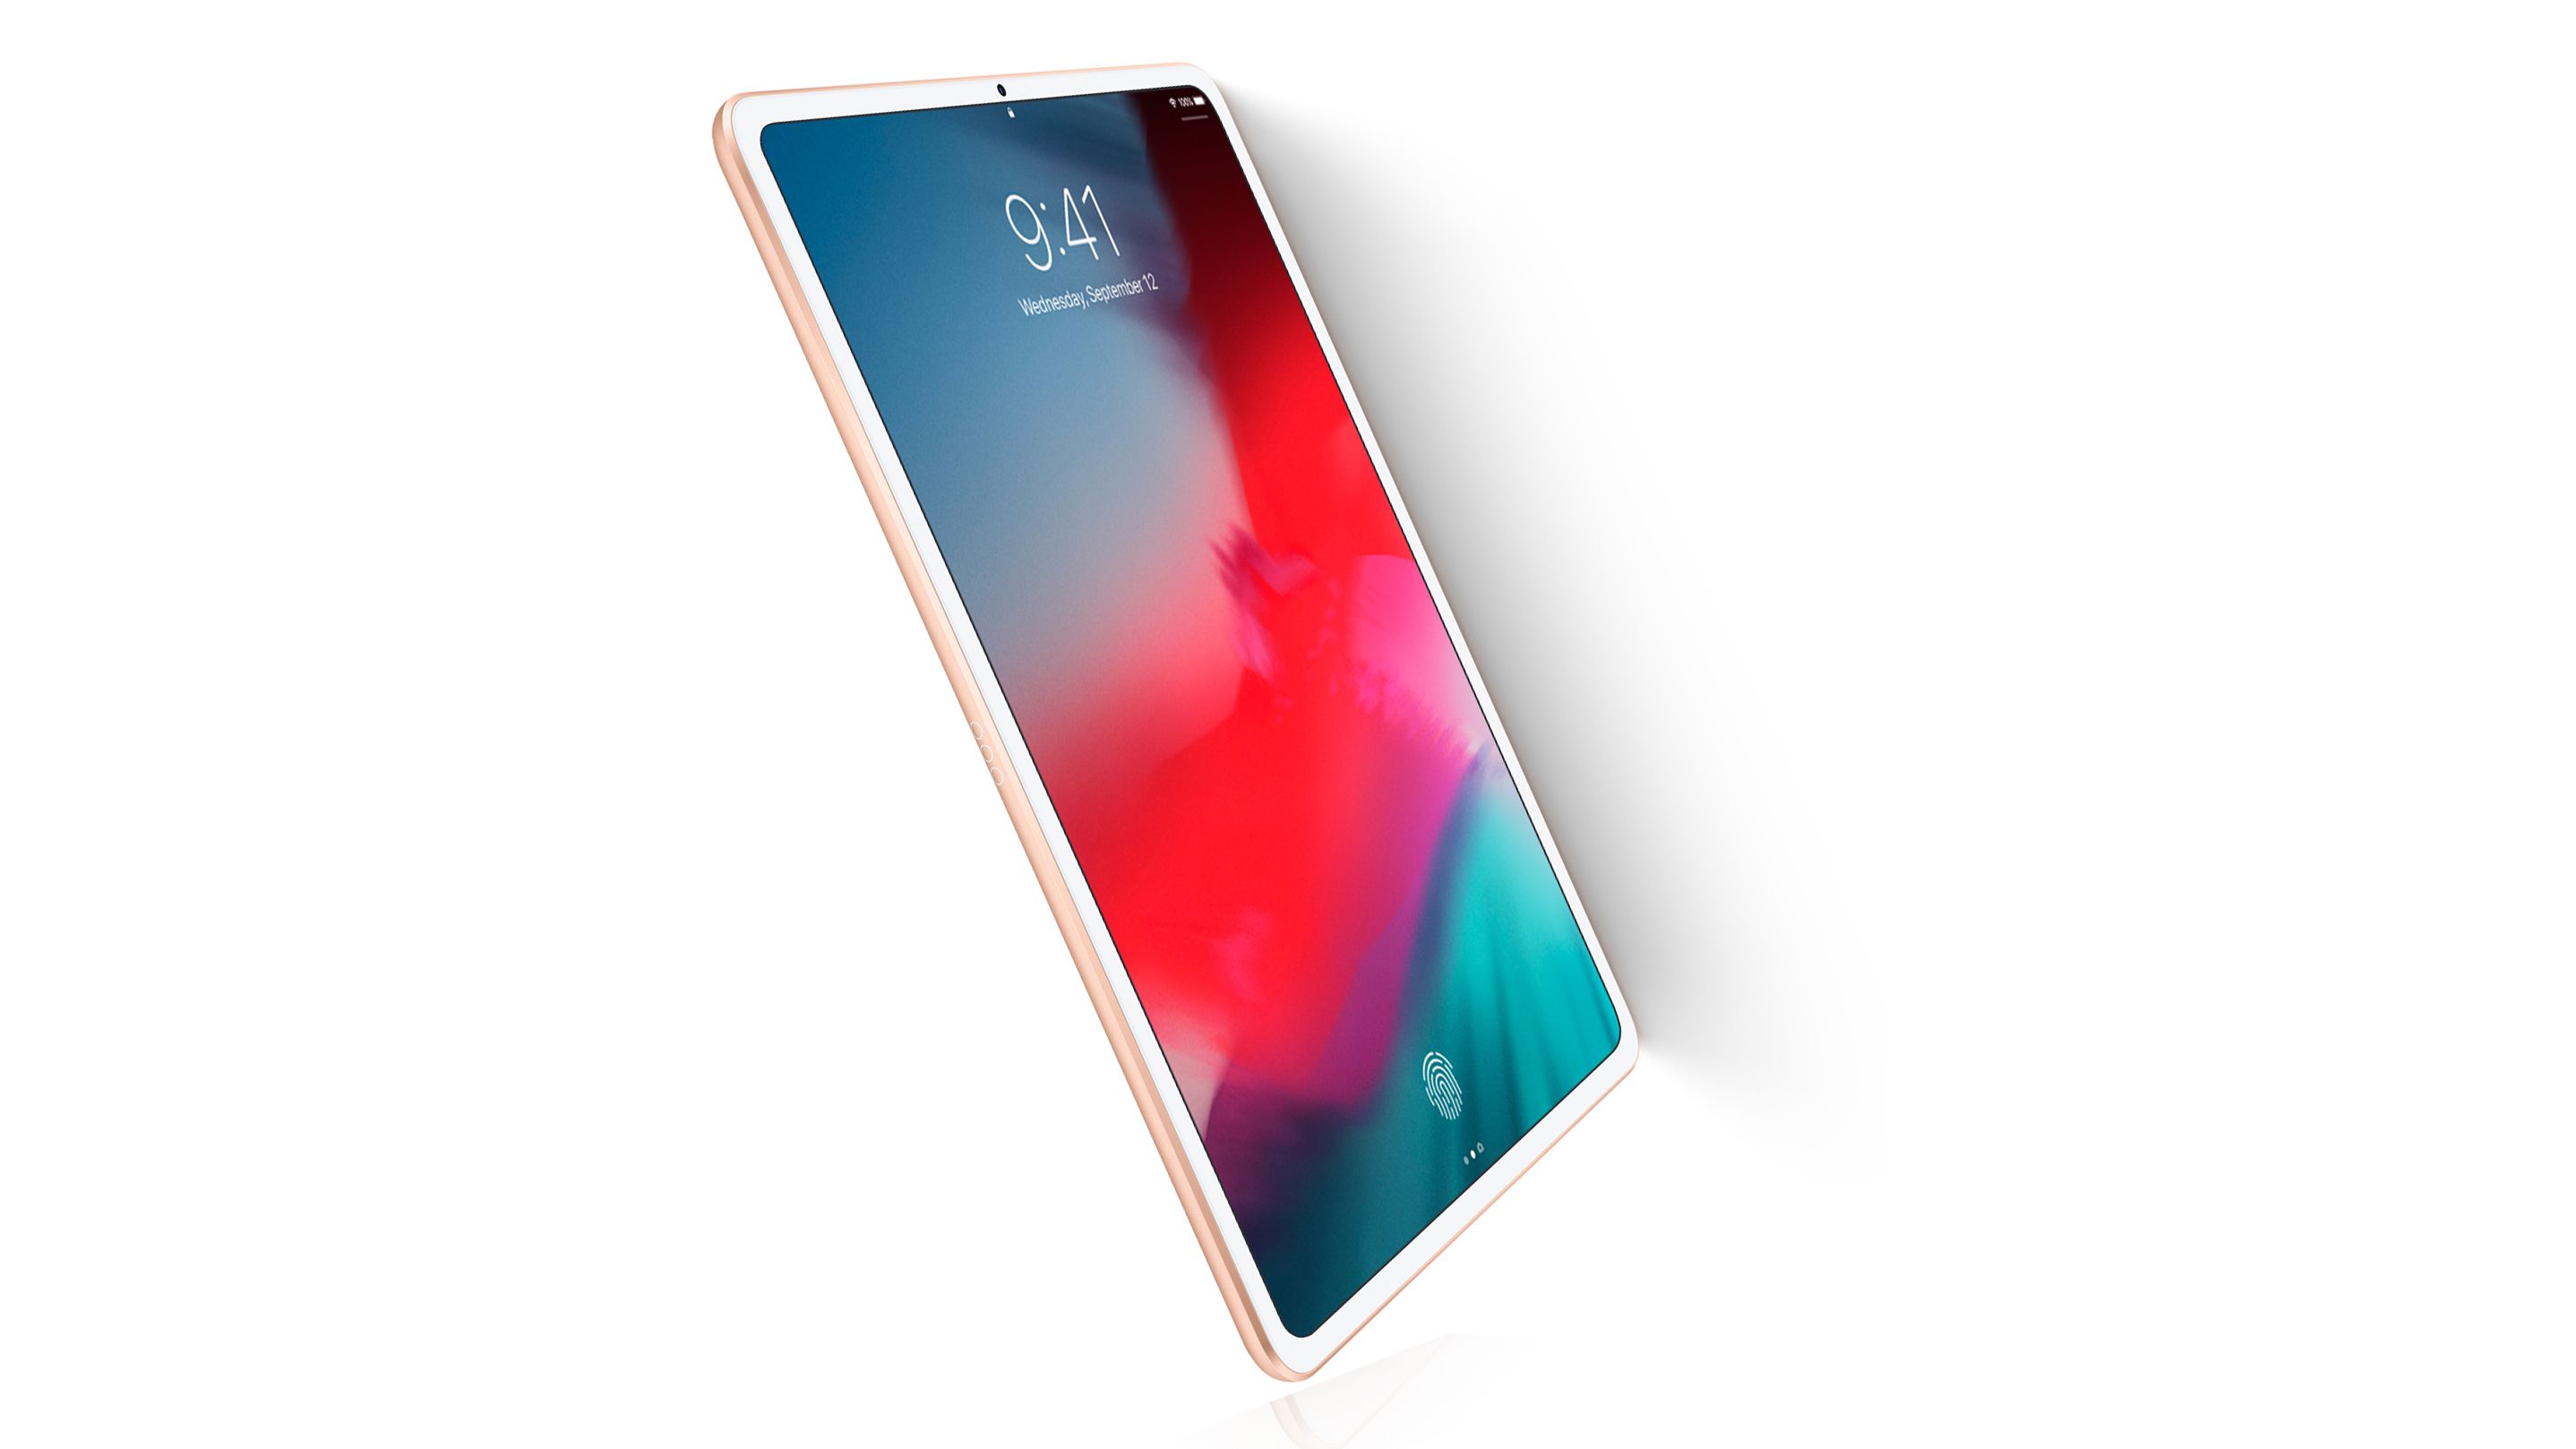 iPad Air 4 Said to Launch in March 2021 With A14 Processor ...